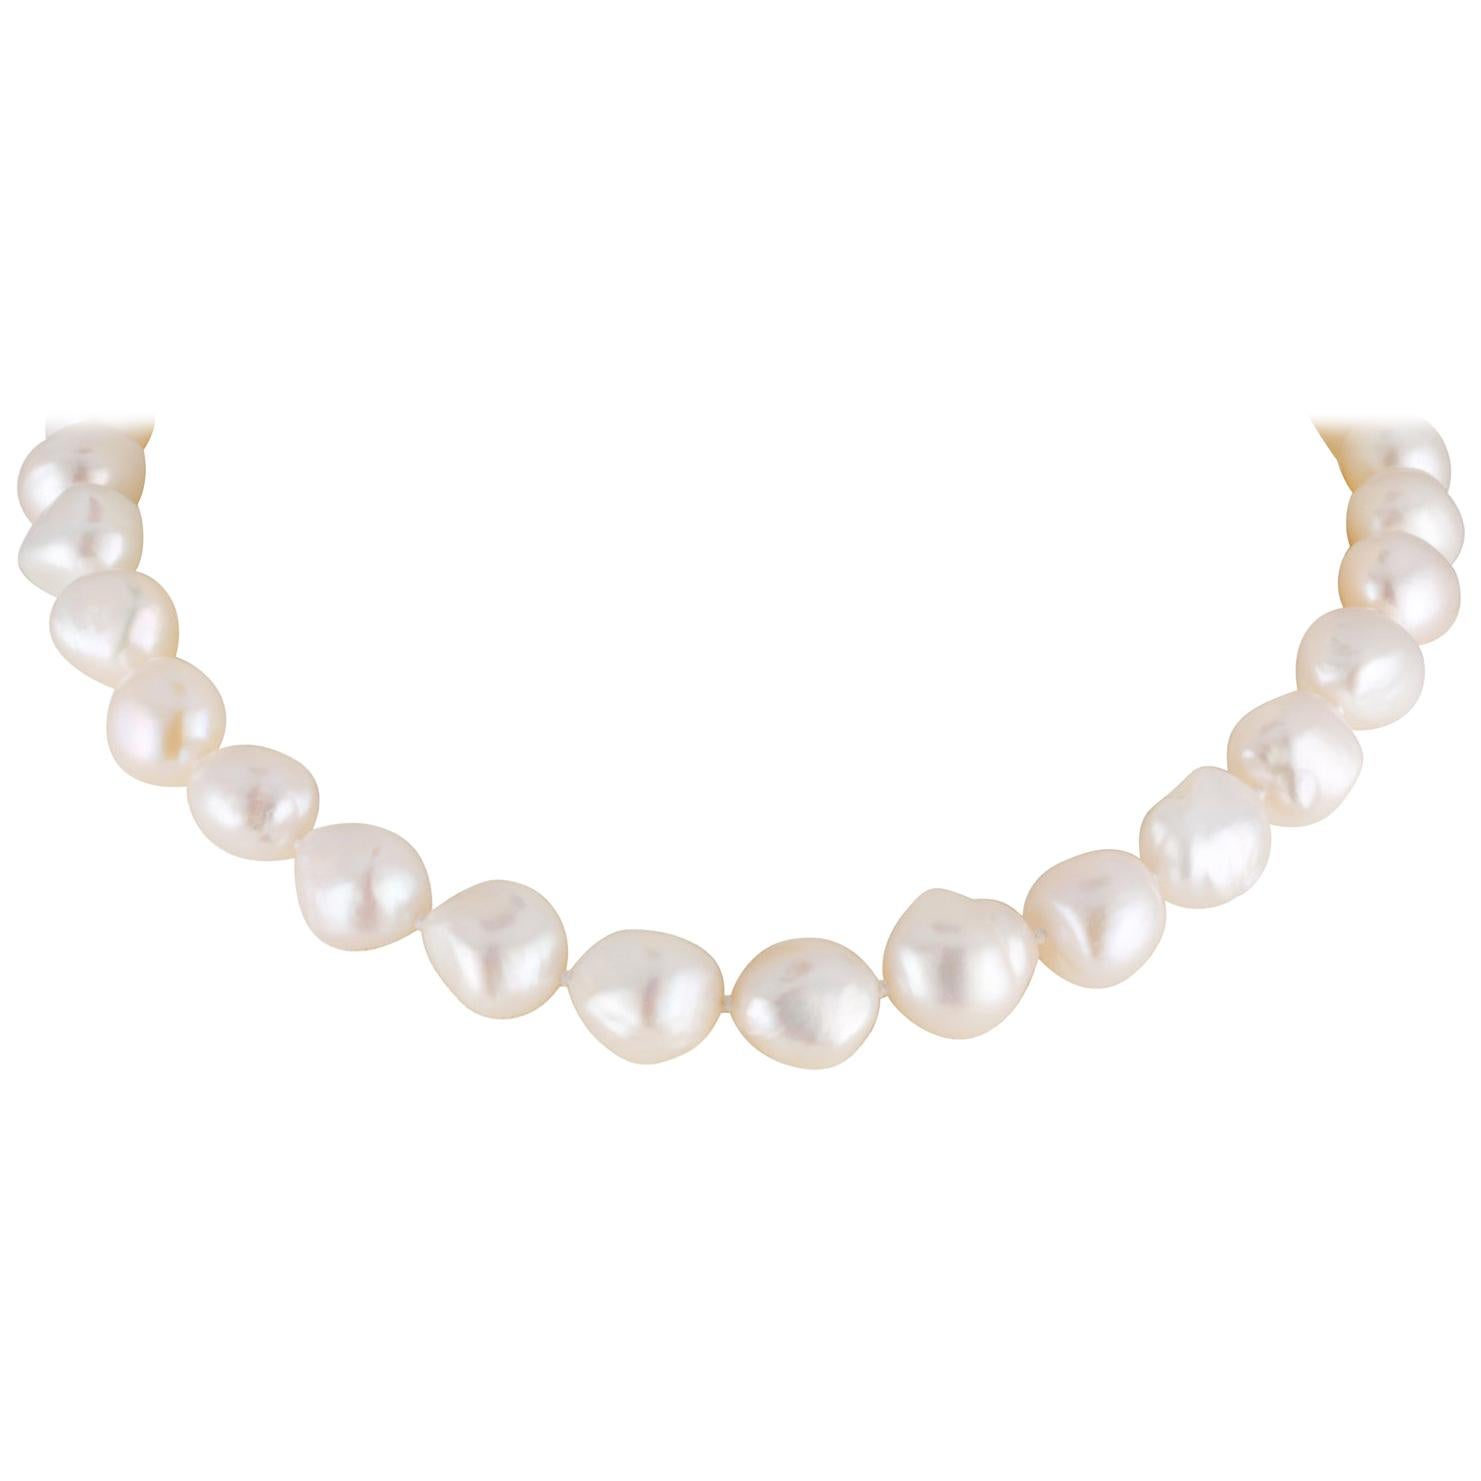 Freshwater White Pearl Baroque Choker Necklace with Silver Clasp